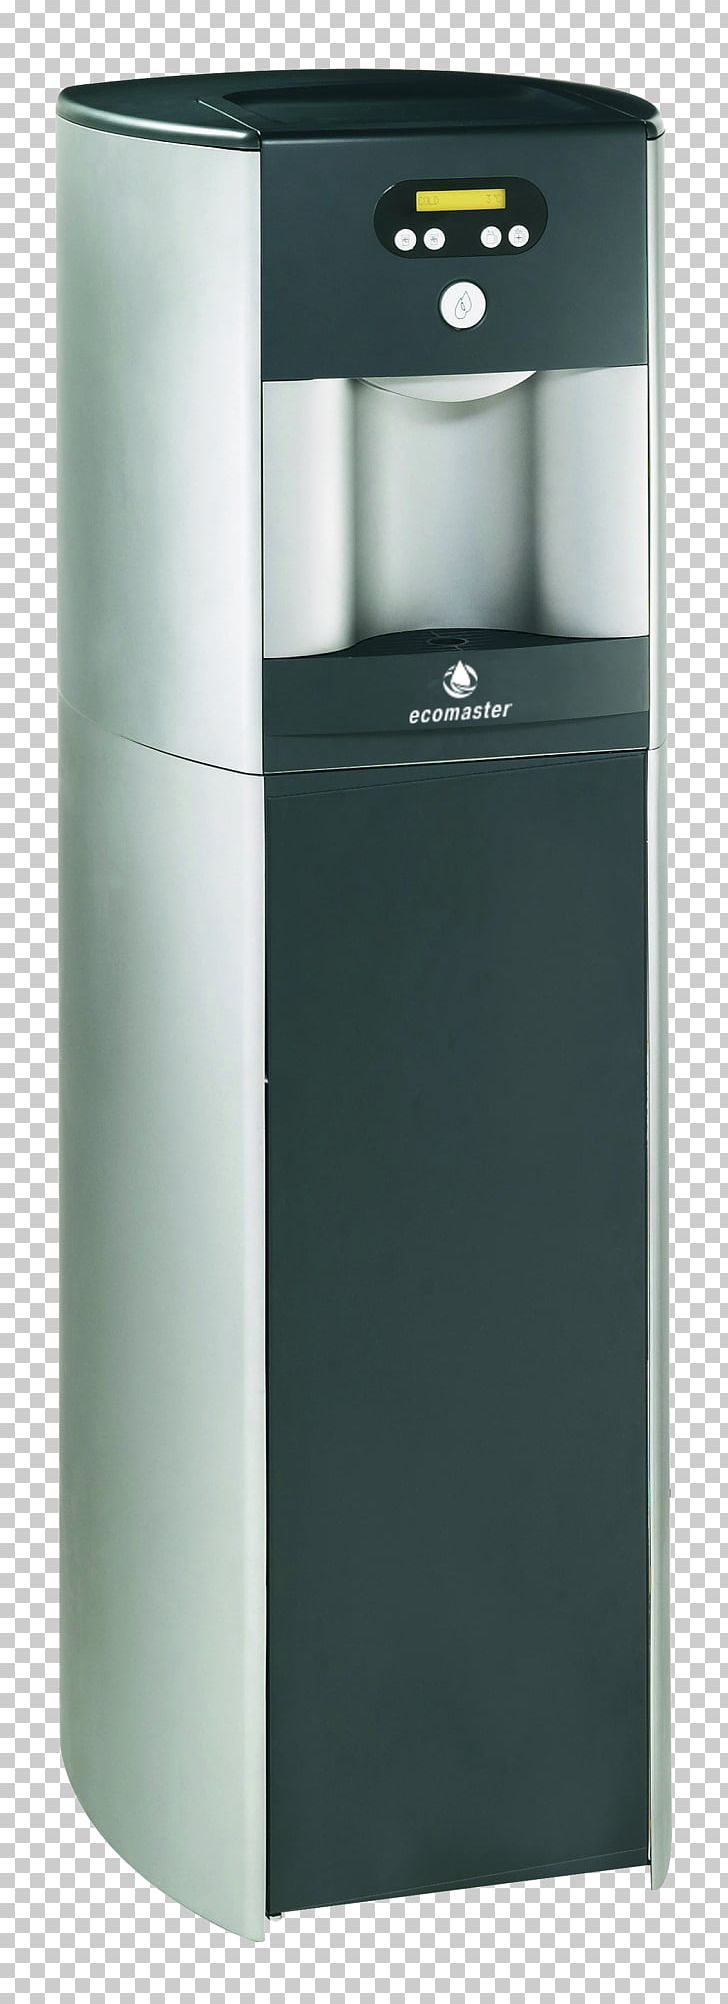 Water Cooler Drinking Water Ekomaster Filtration PNG, Clipart, Carbonated Water, Carboy, Drinking Water, Ecotronic, Ekodar Free PNG Download